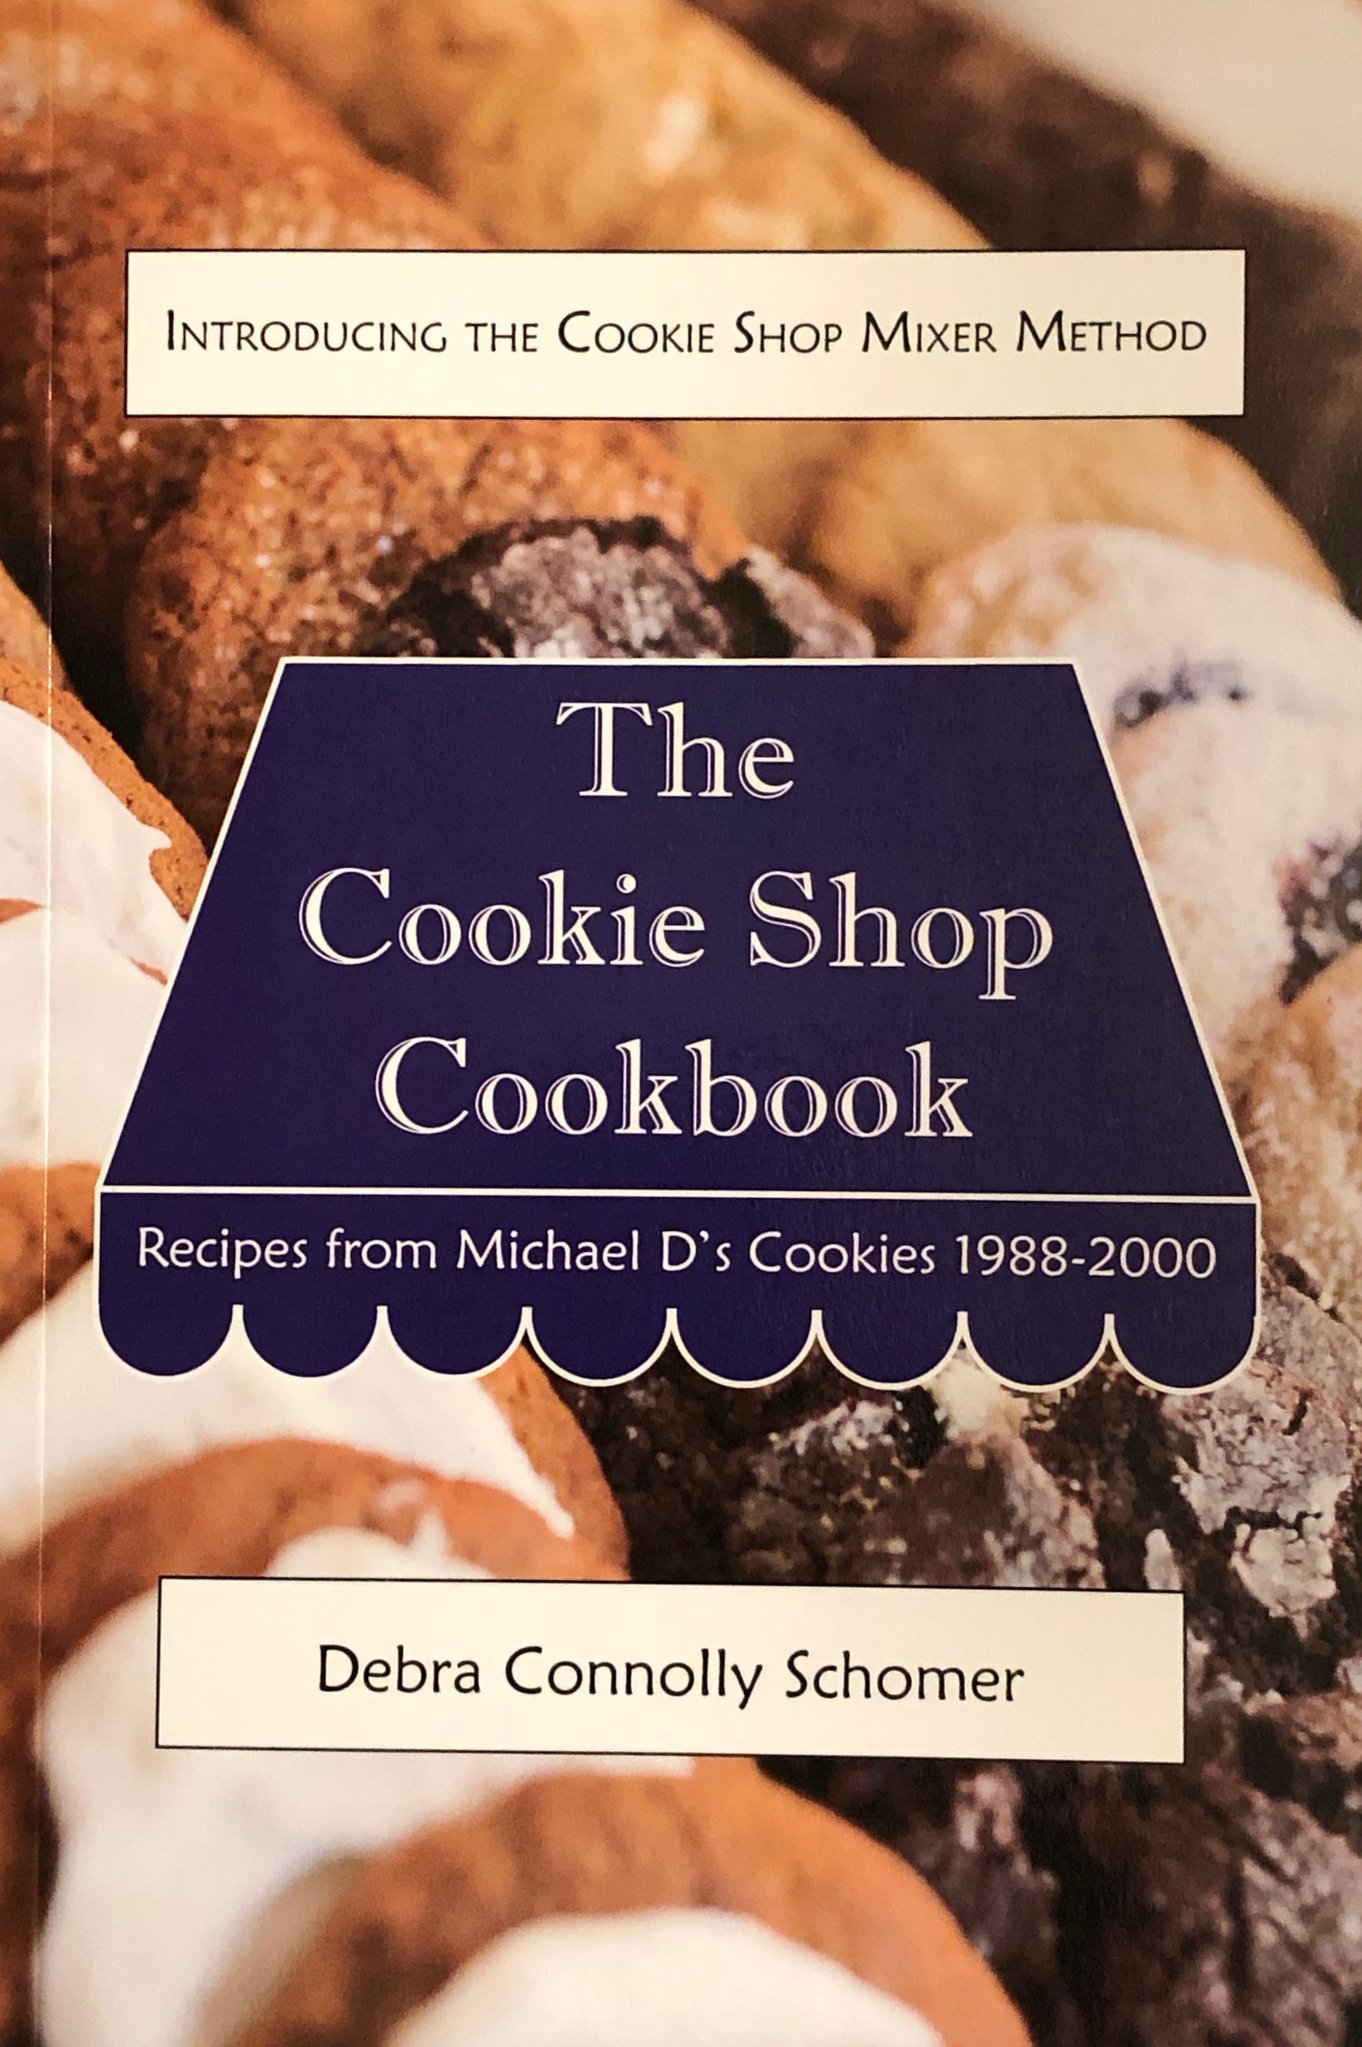 The Cookie Shop Cookbook: Recipes from Michael D’s Cookies 1988-2000 by Debra Connolly Schomer